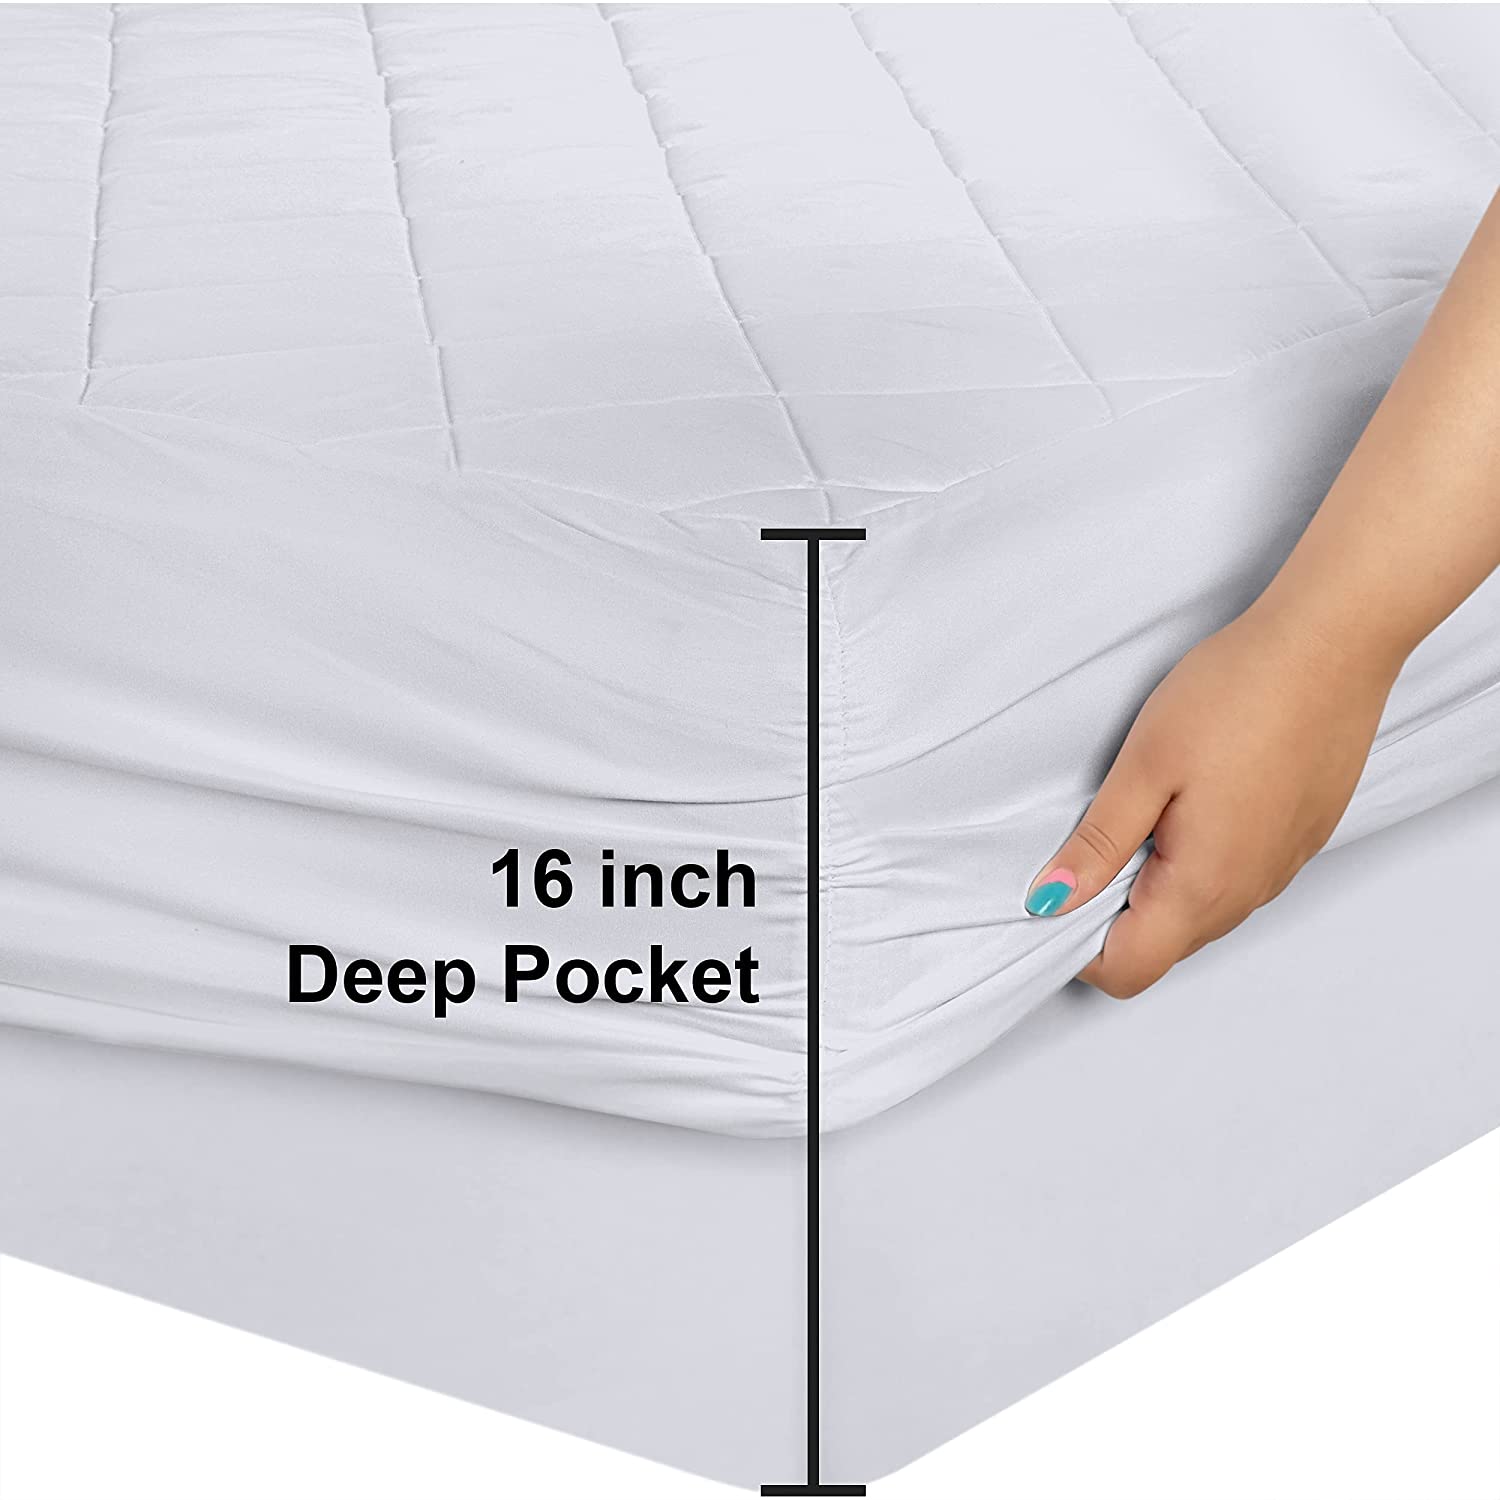 Utopia Bedding Mattress Pad Review 2019 - Worth It or Waste of Money?